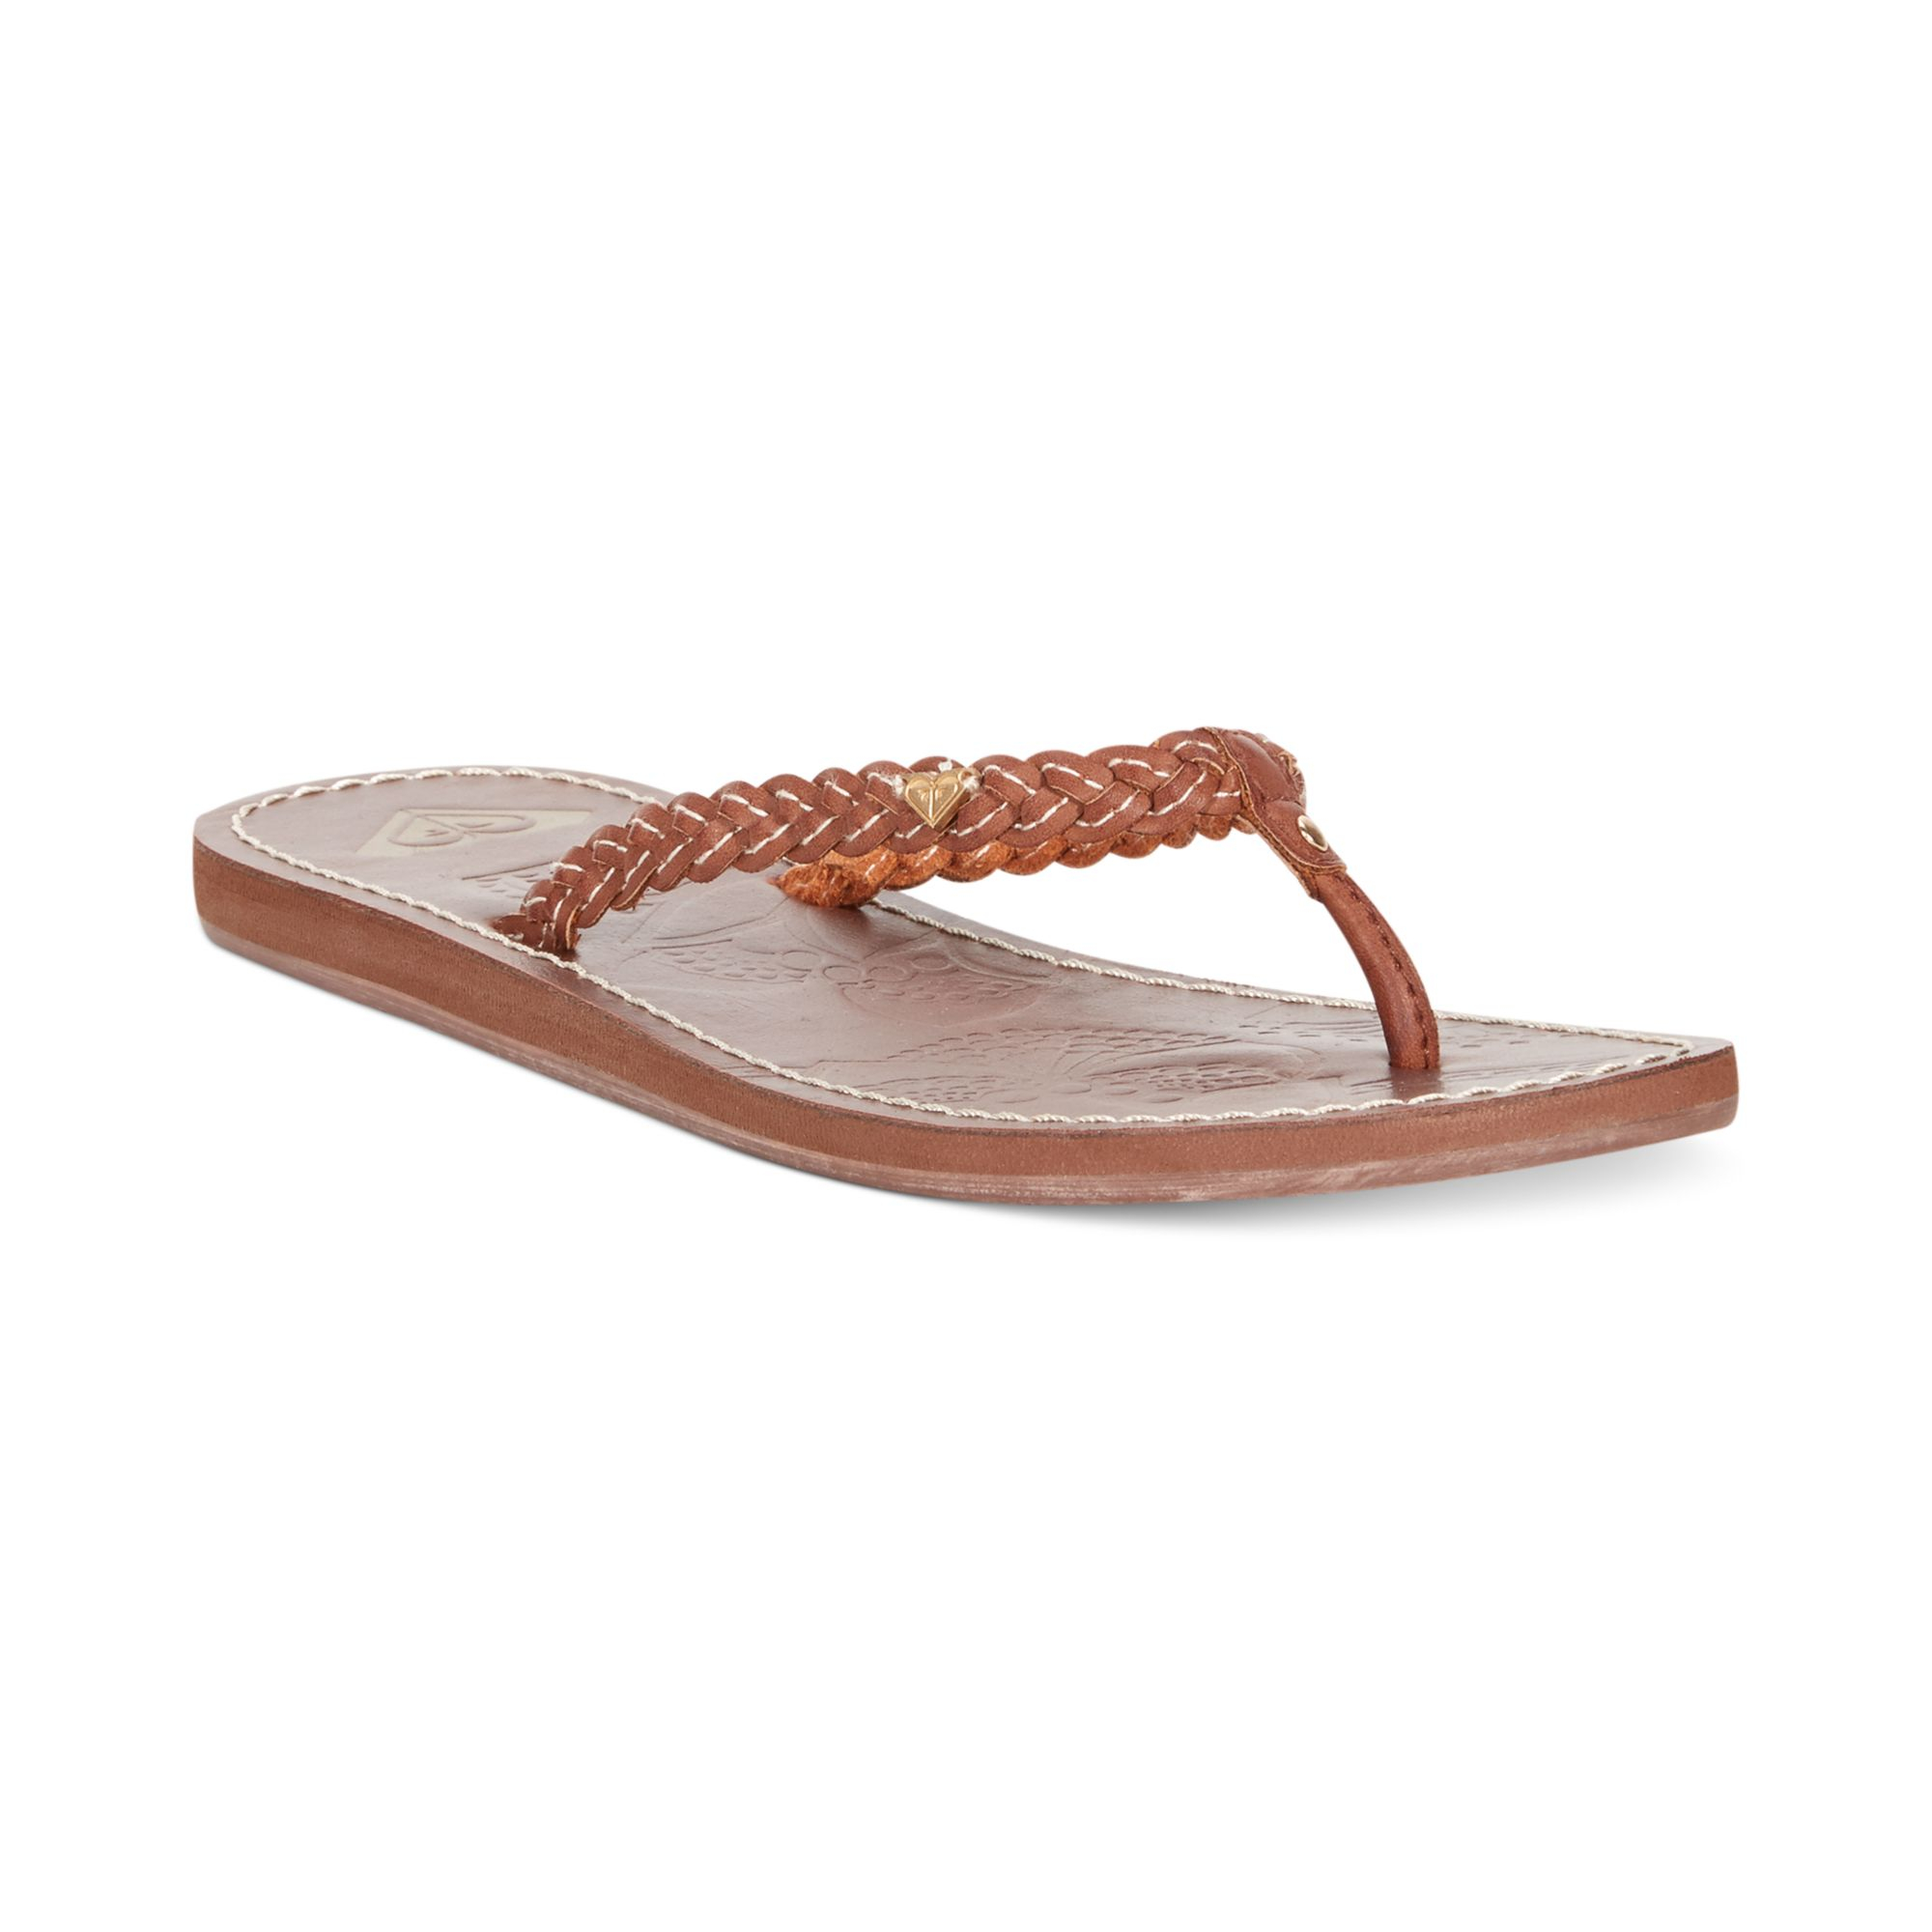 Roxy Mateo Braided Thong Sandals in Brown | Lyst